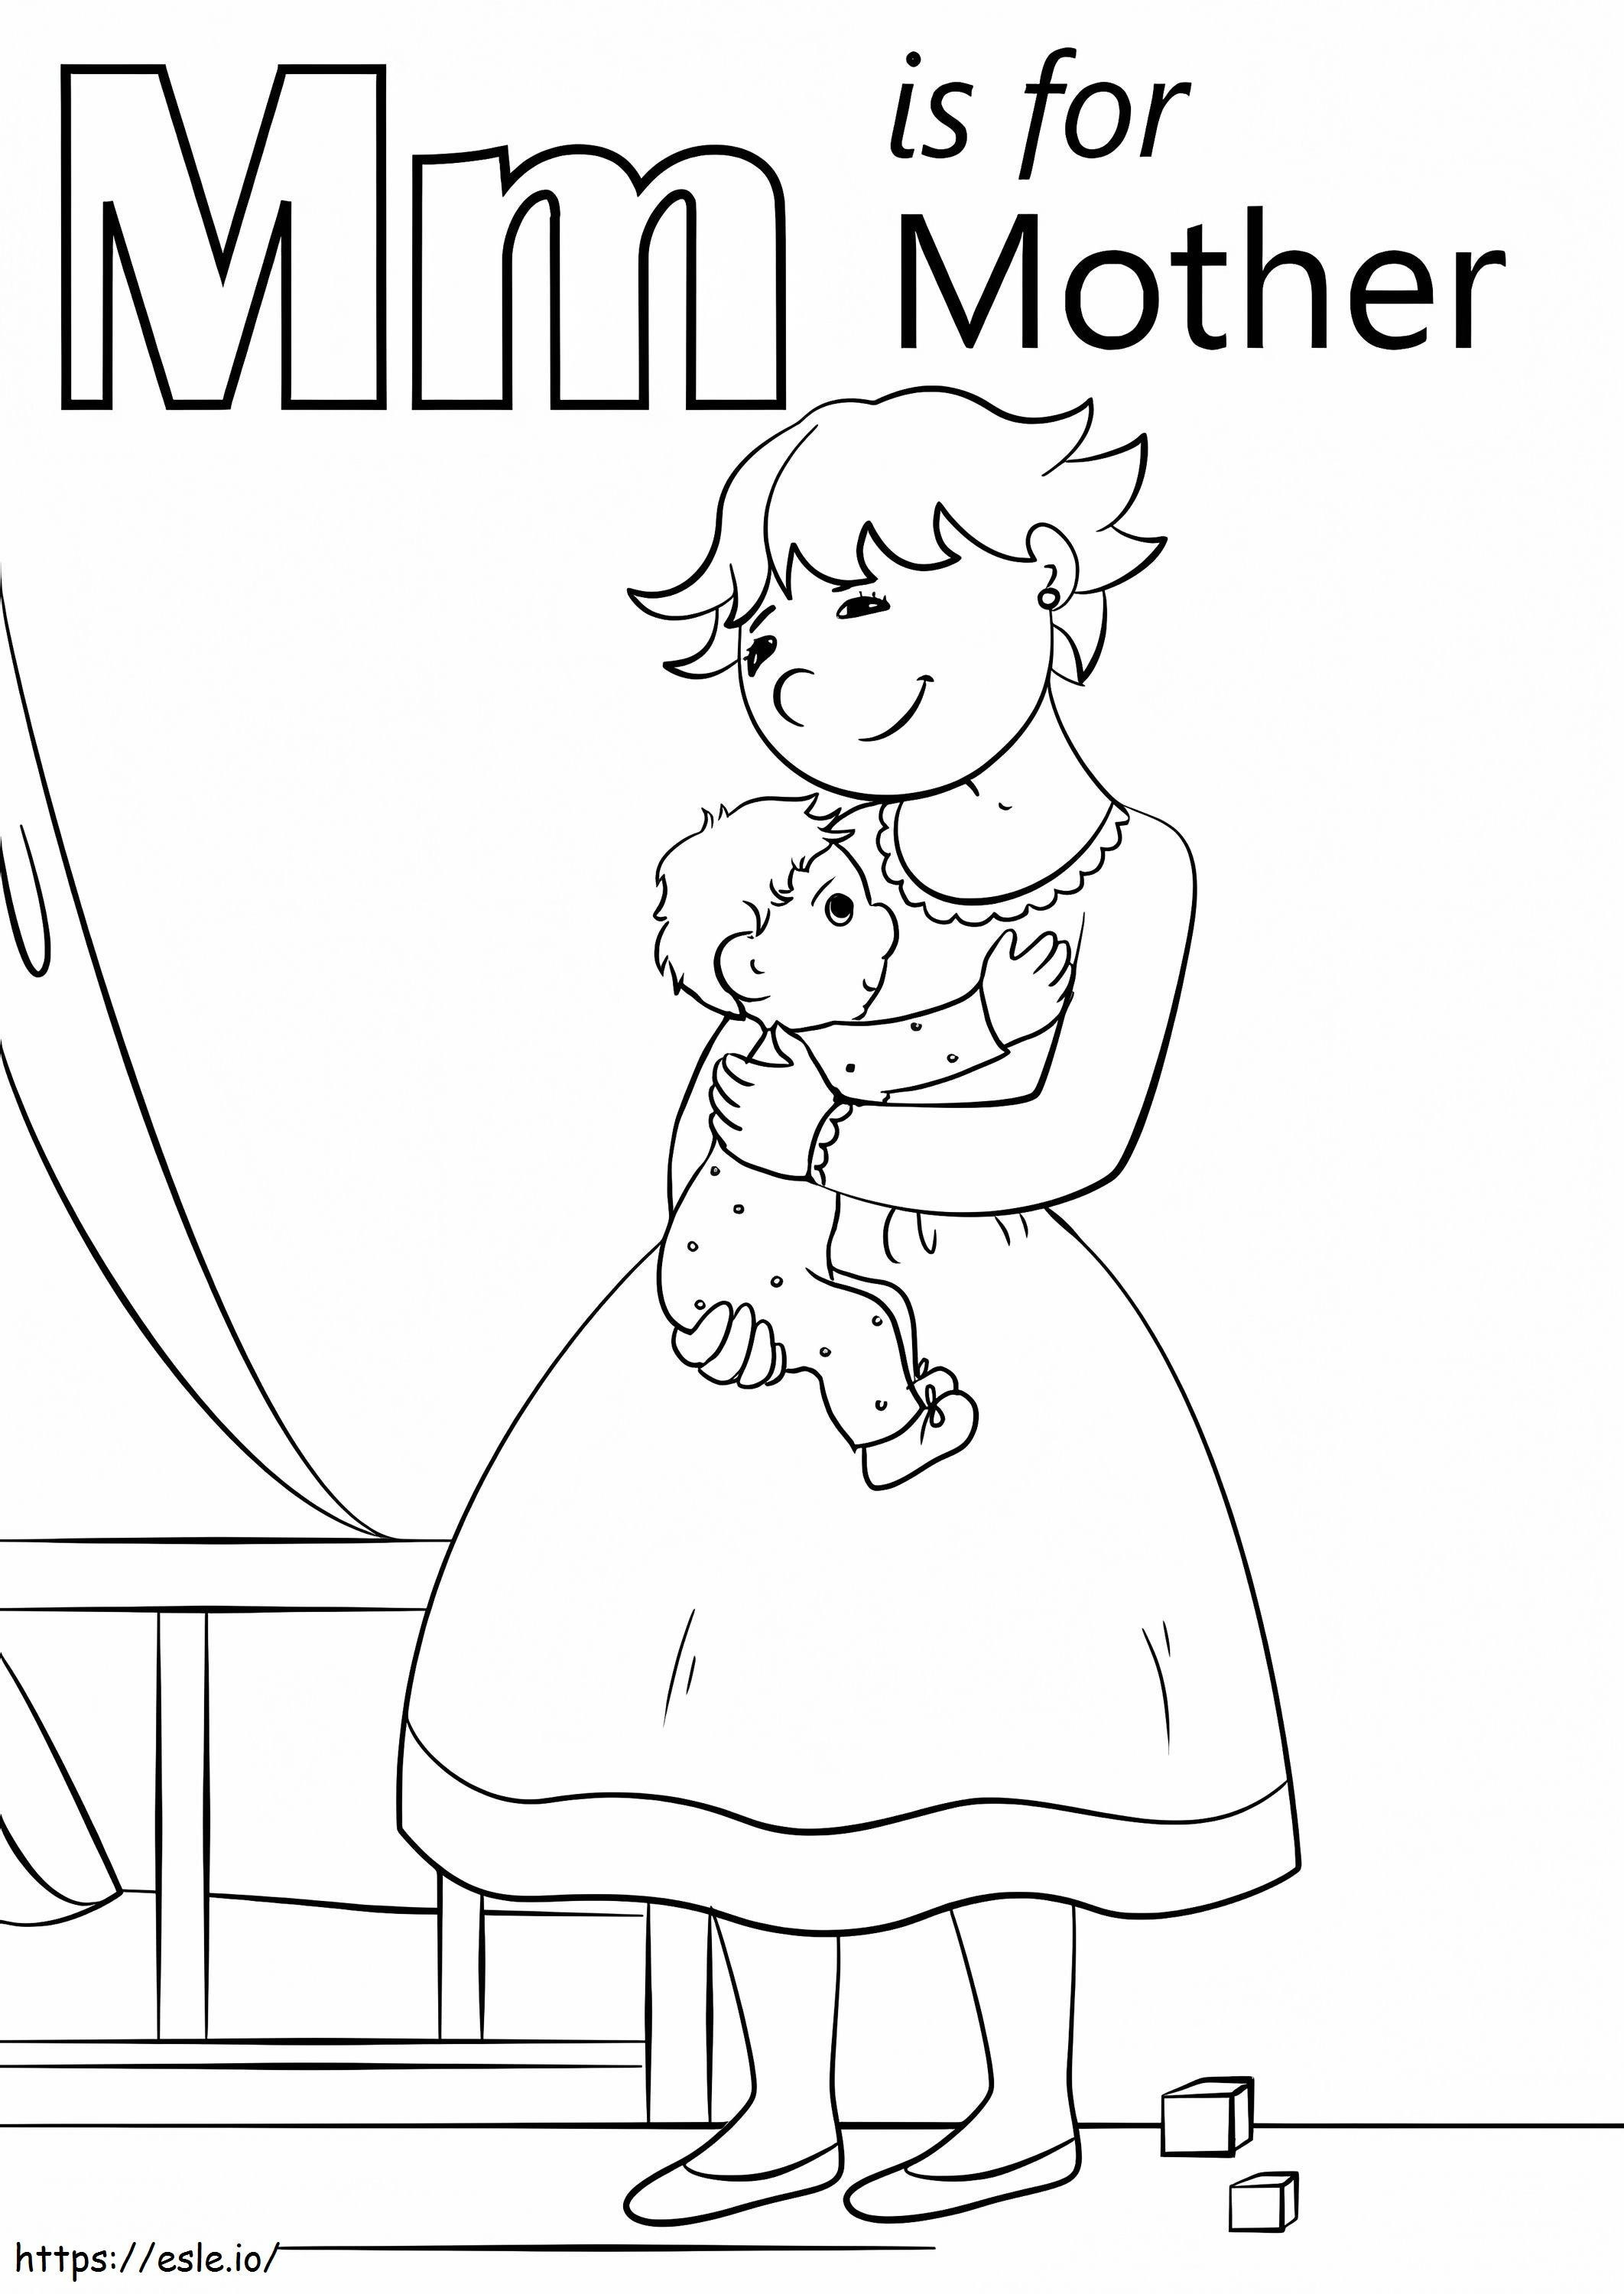 Mother Letter M coloring page